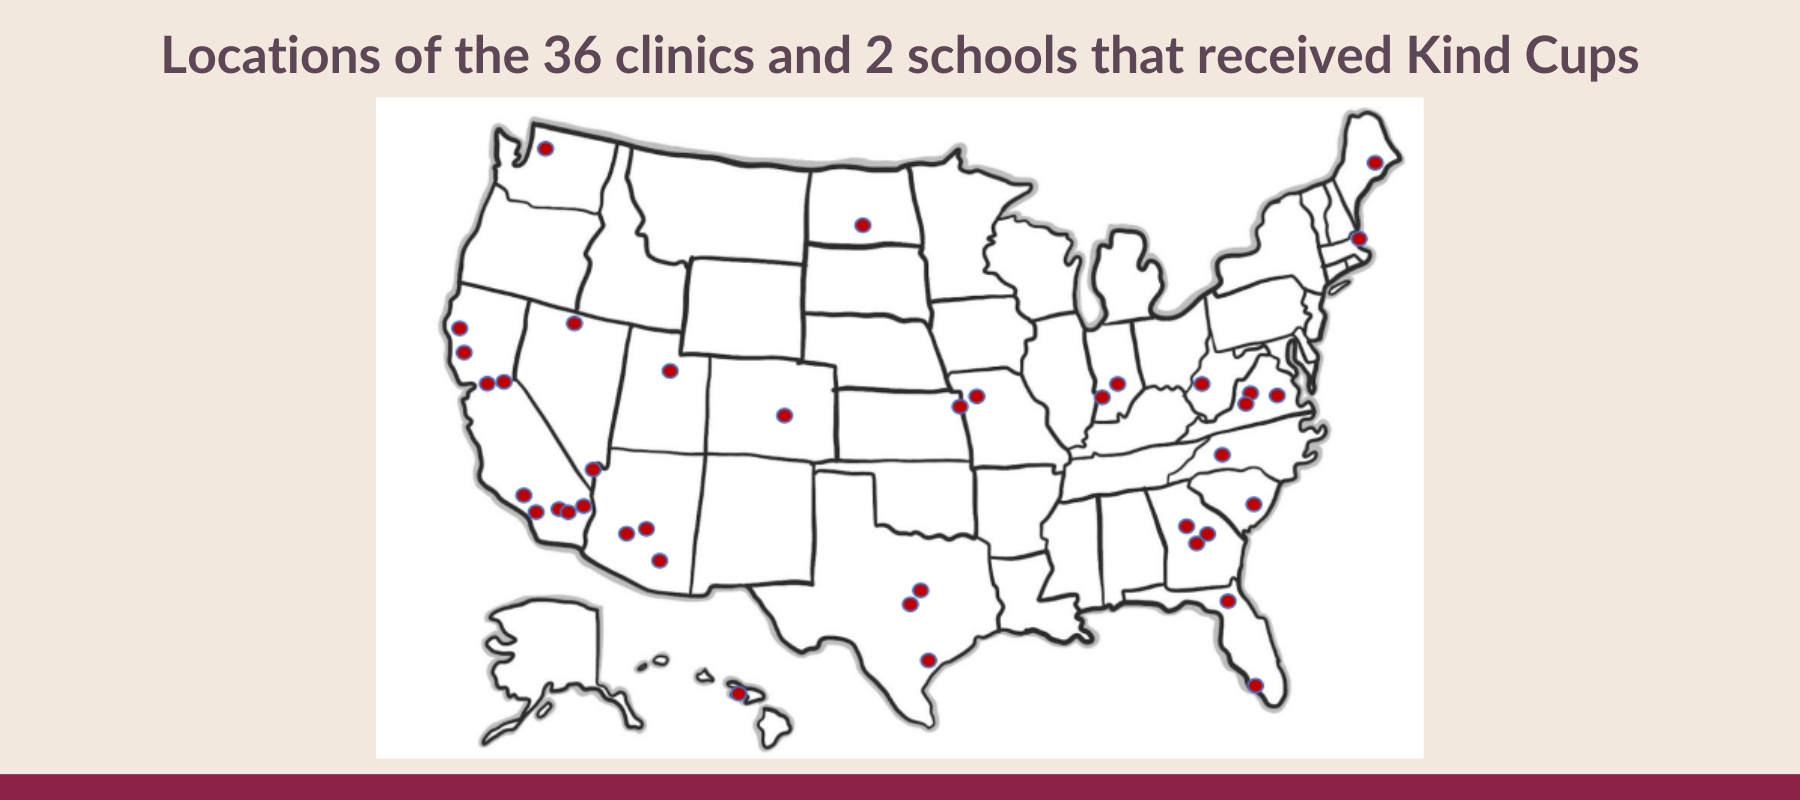 Locations of the 36 health clinics and 2 schools that received Kind Cup  menstrual cup donations. Map of United States shows red dots all over the states.